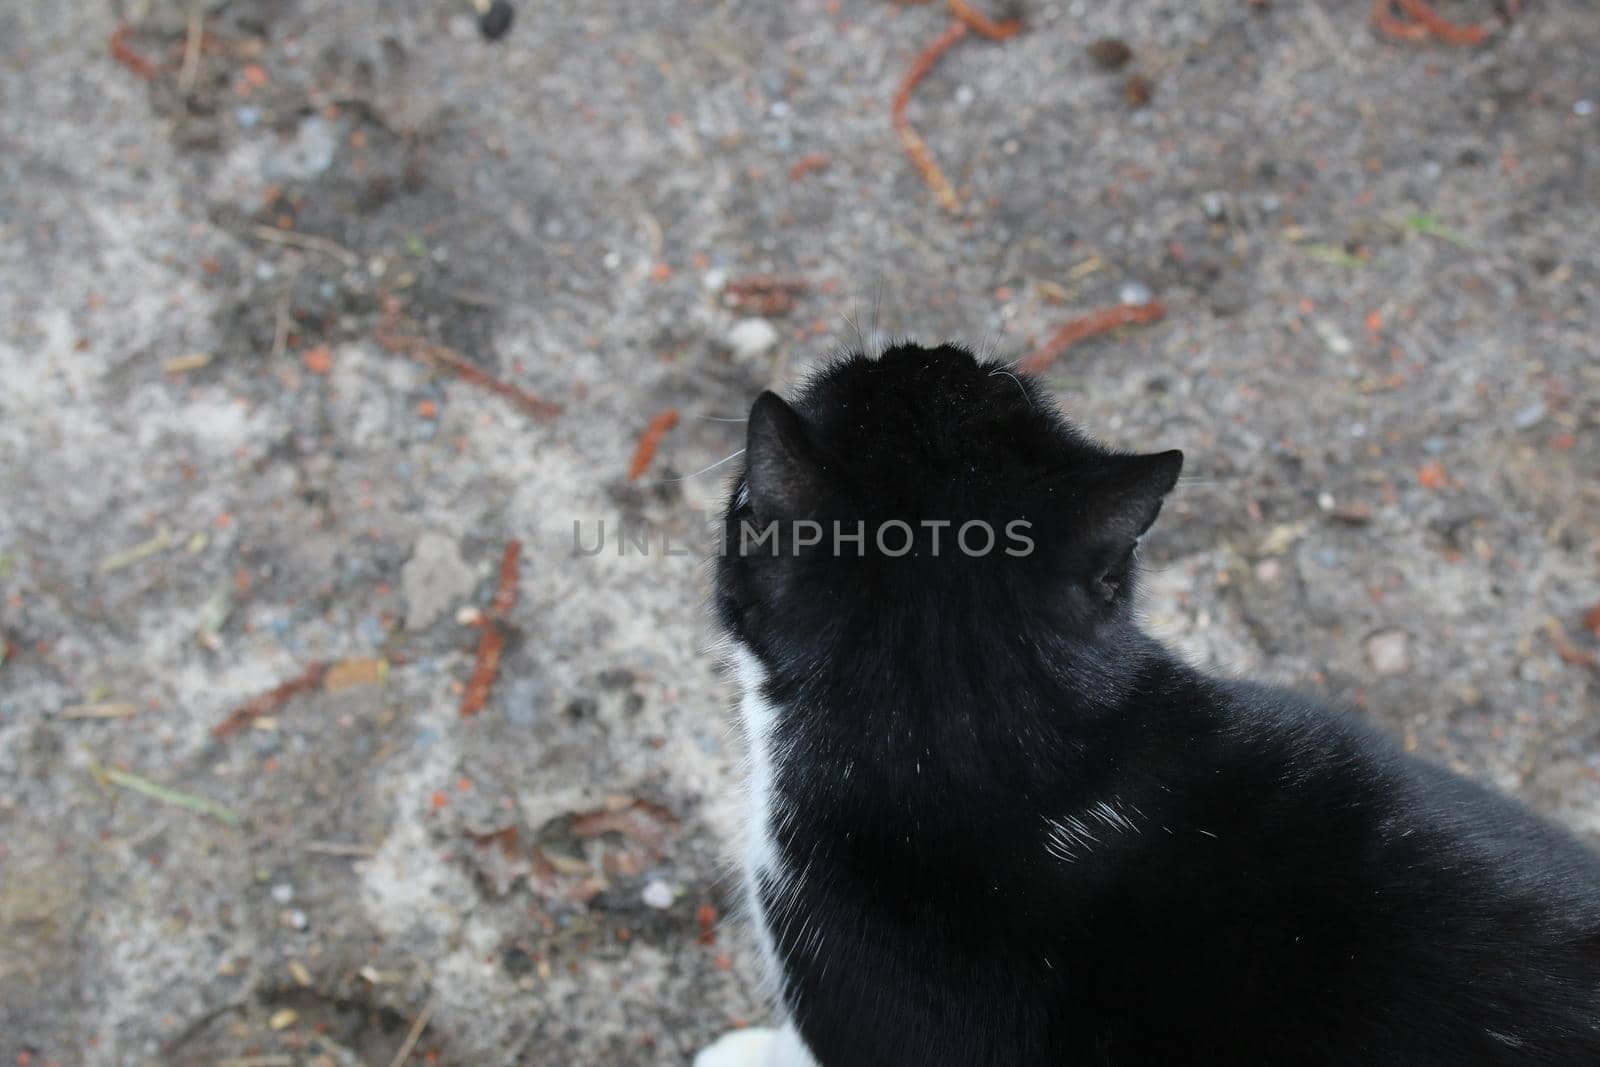 Black cat from aboveagainst a grey undersoil as a close up